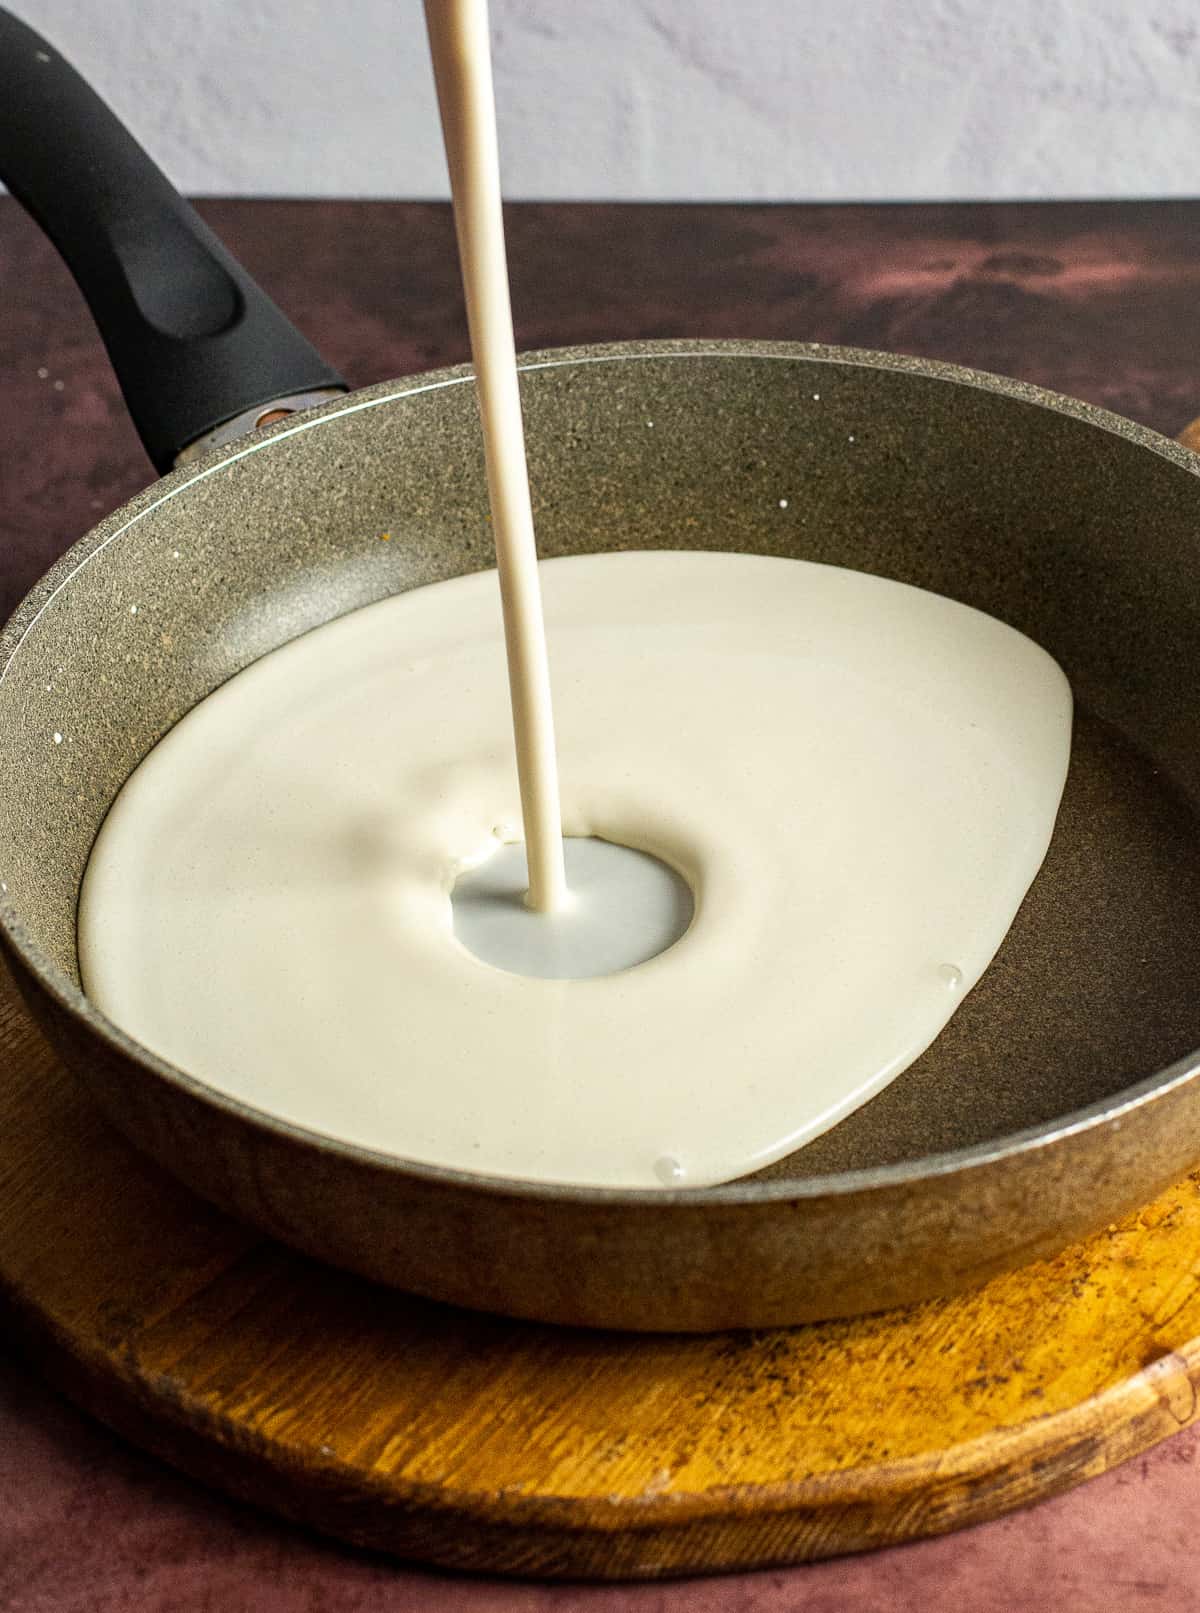 liquid being poured into a nonstick skillet.